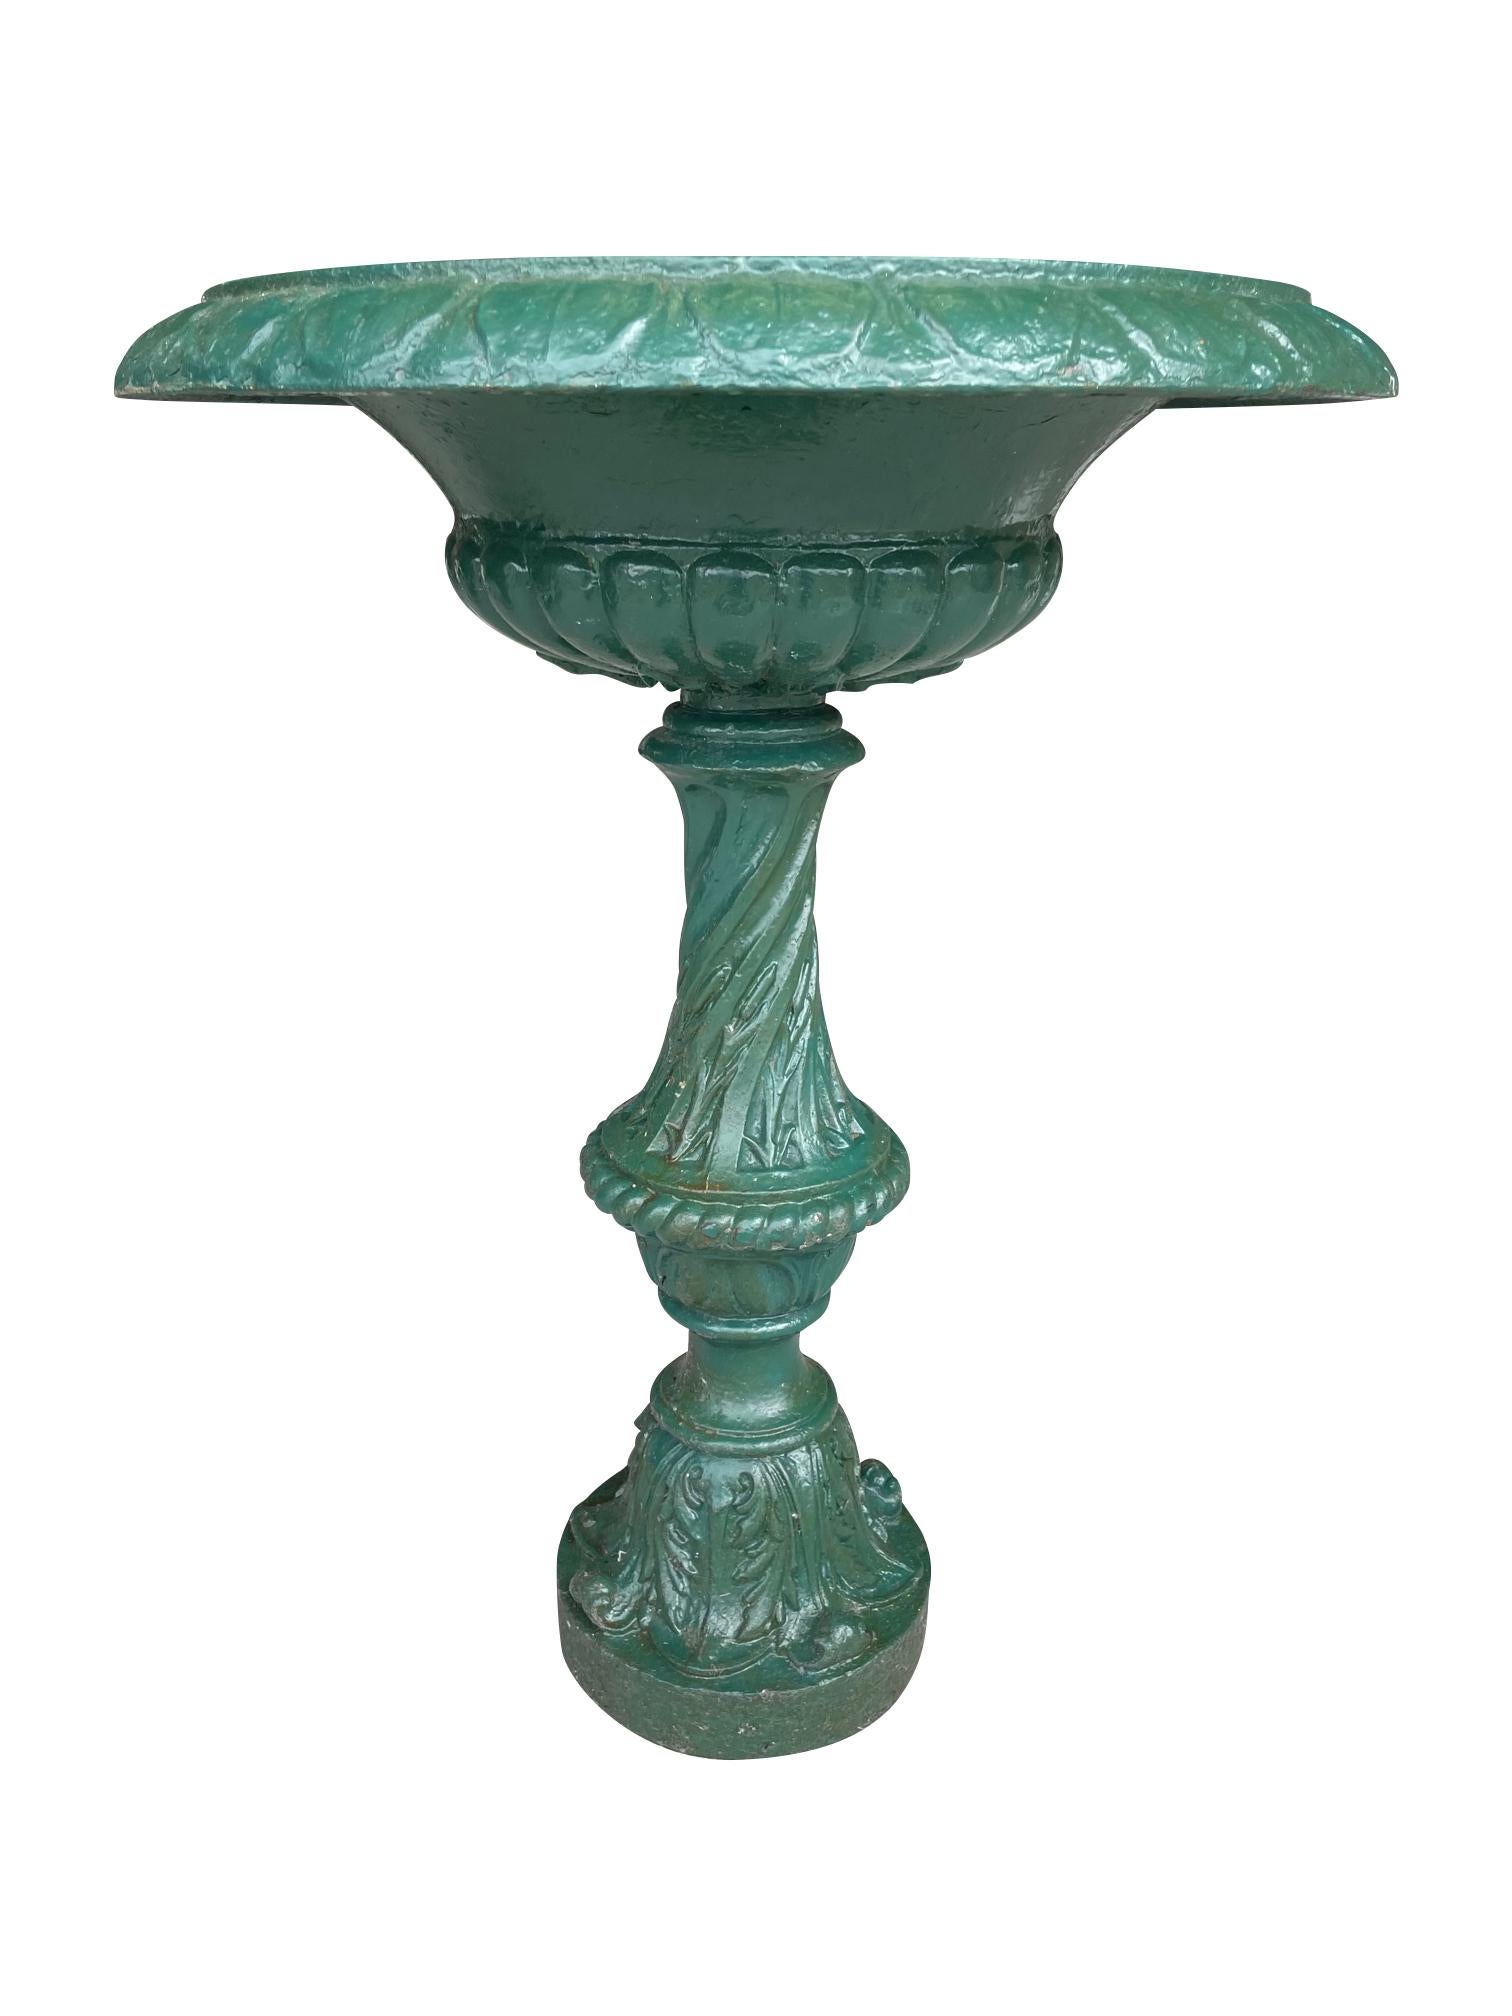 A 19th century French cast iron bird bath in green paint, an unusual and quite a rare item, it could also be used as a planter, but there are no drainage holes

Height 73cm / 28.7”

Diameter 54cm / 21.3”